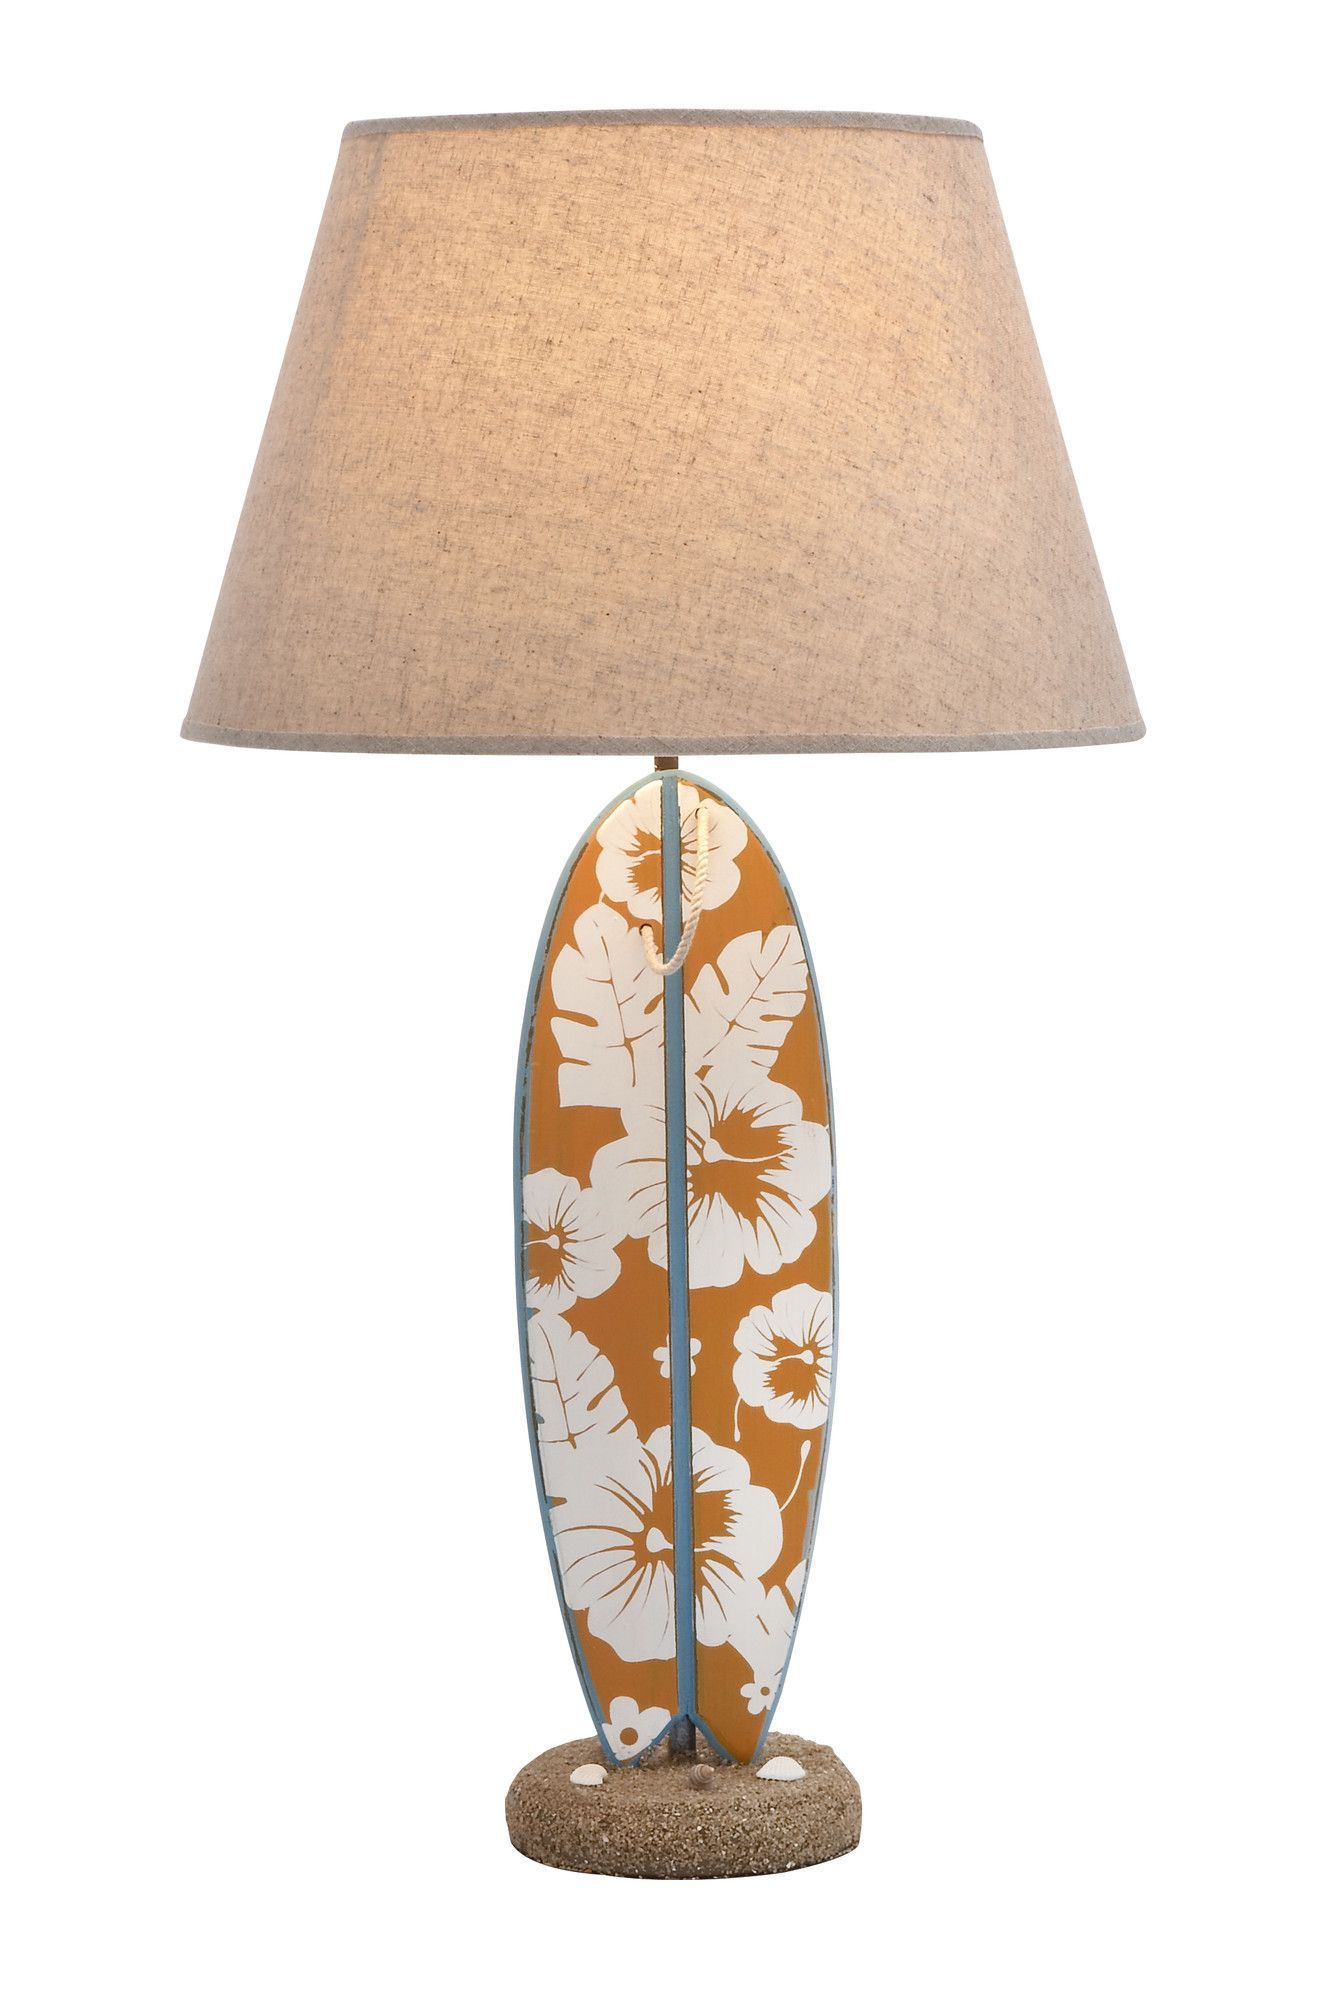 Highfill 21 Table Lamp Wooden Table Lamps Surfboard pertaining to dimensions 1334 X 2000